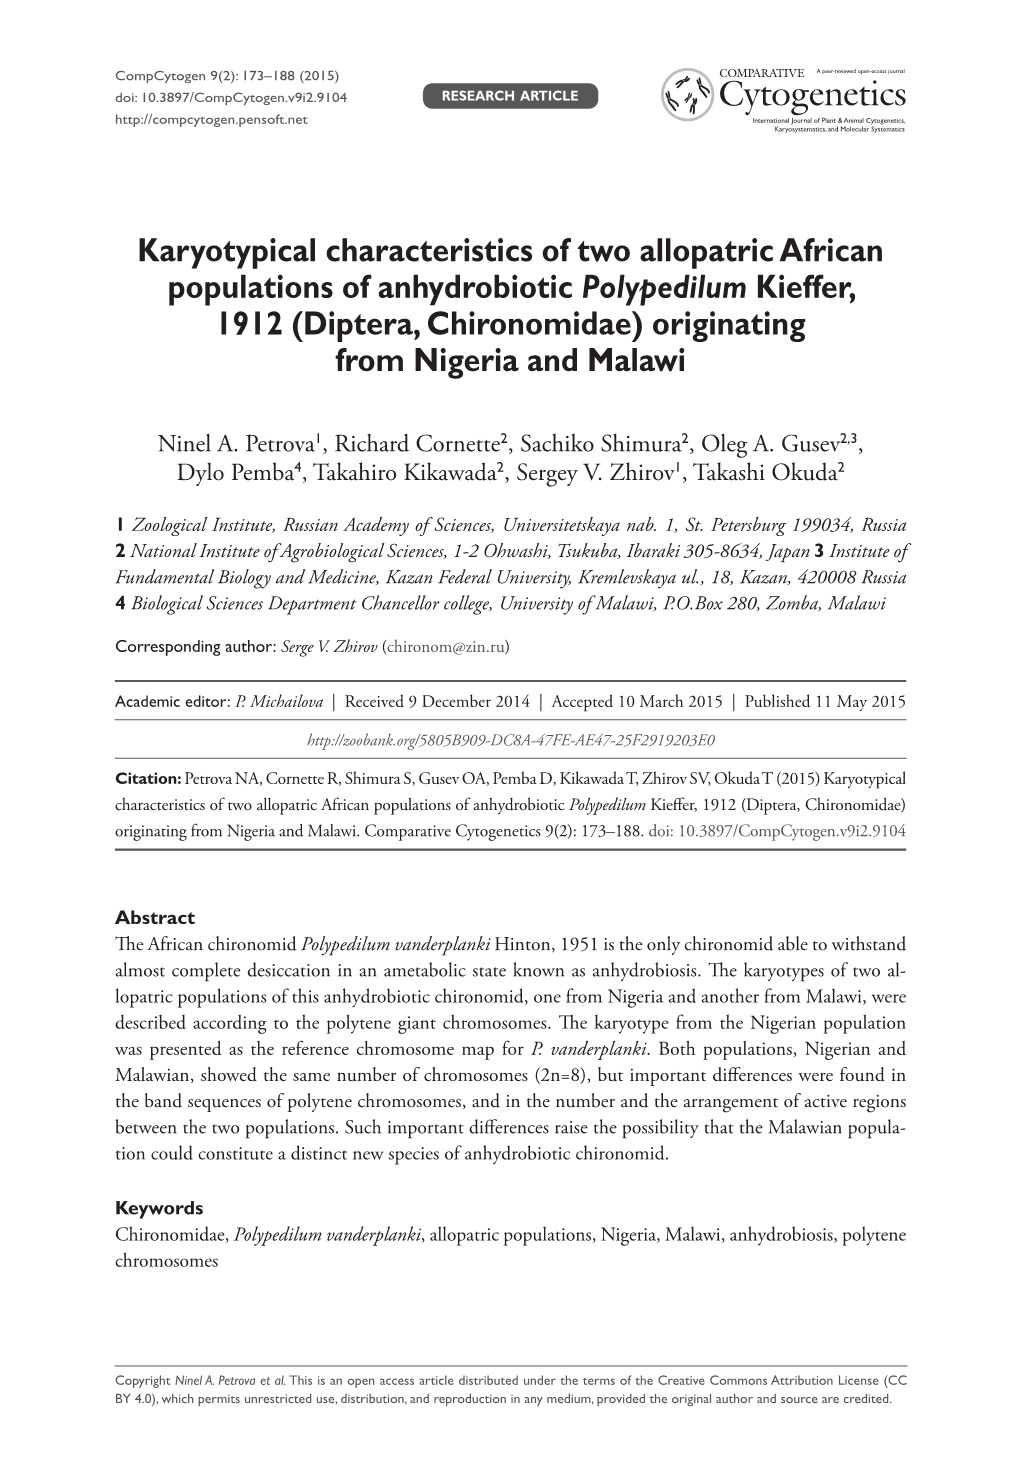 Karyotypical Characteristics of Two Allopatric African Populations Of